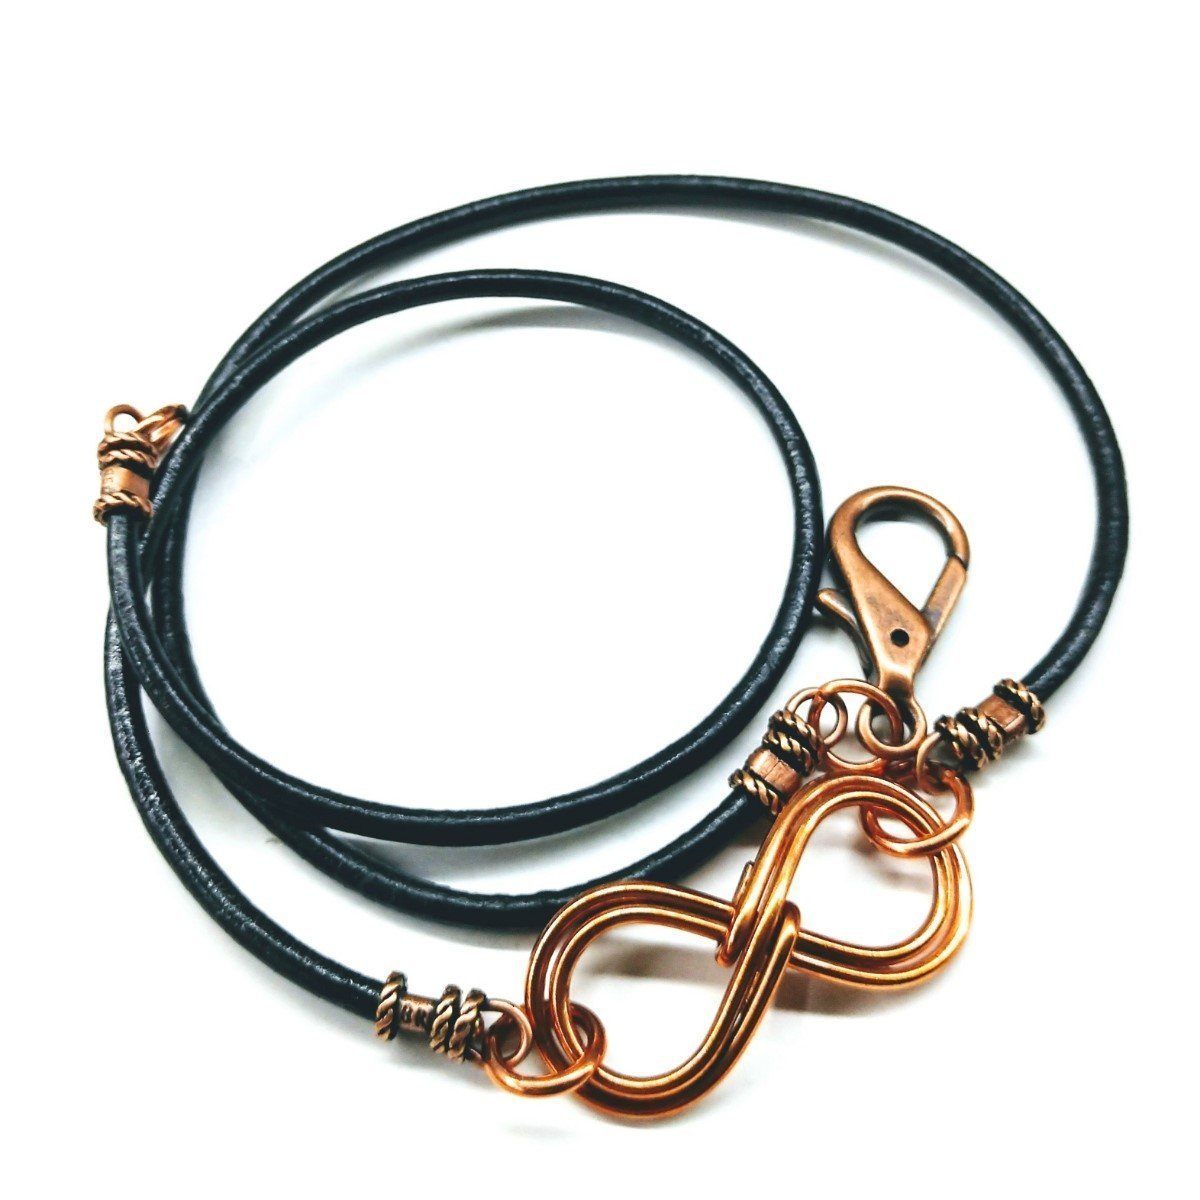 Copper Double Infinity Leather Wrap Bracelet for Men and Women - Handcrafted in Montana Bijou Her